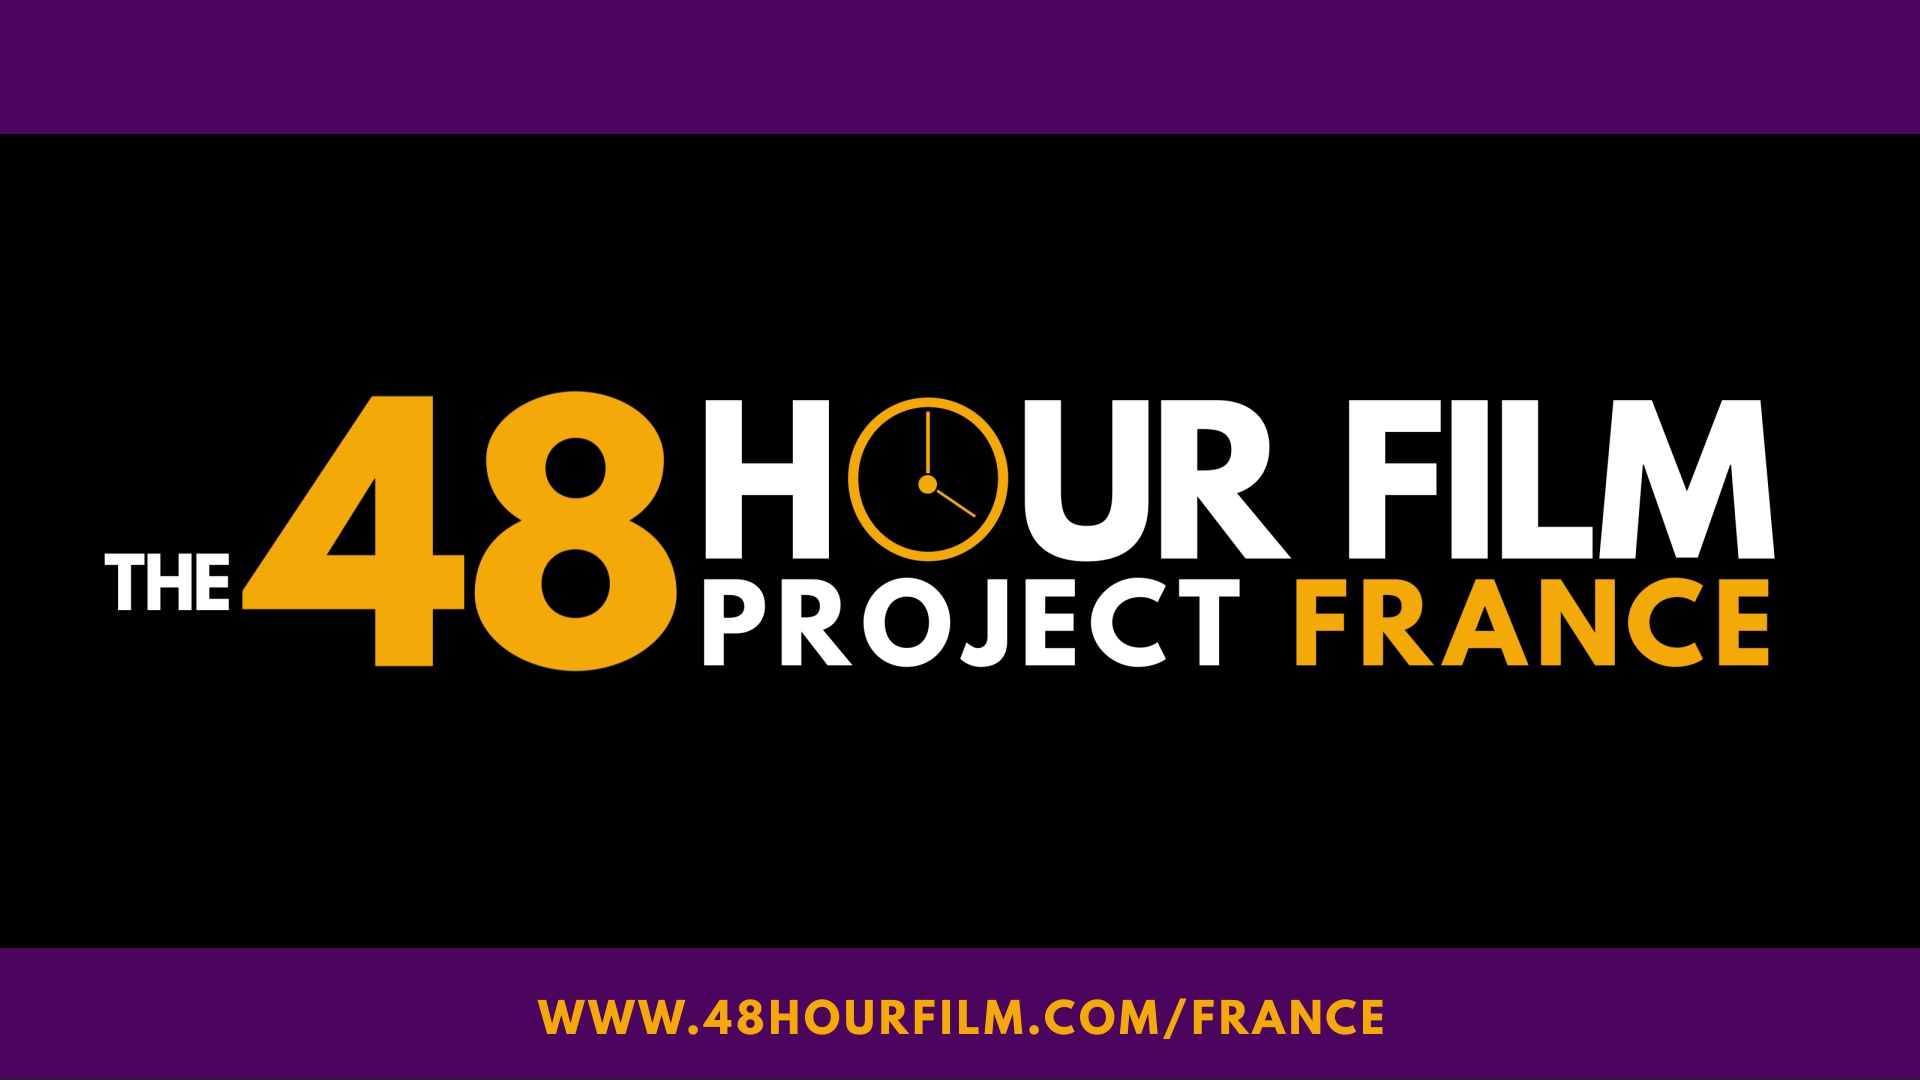 48 HOUR FILM PROJECT